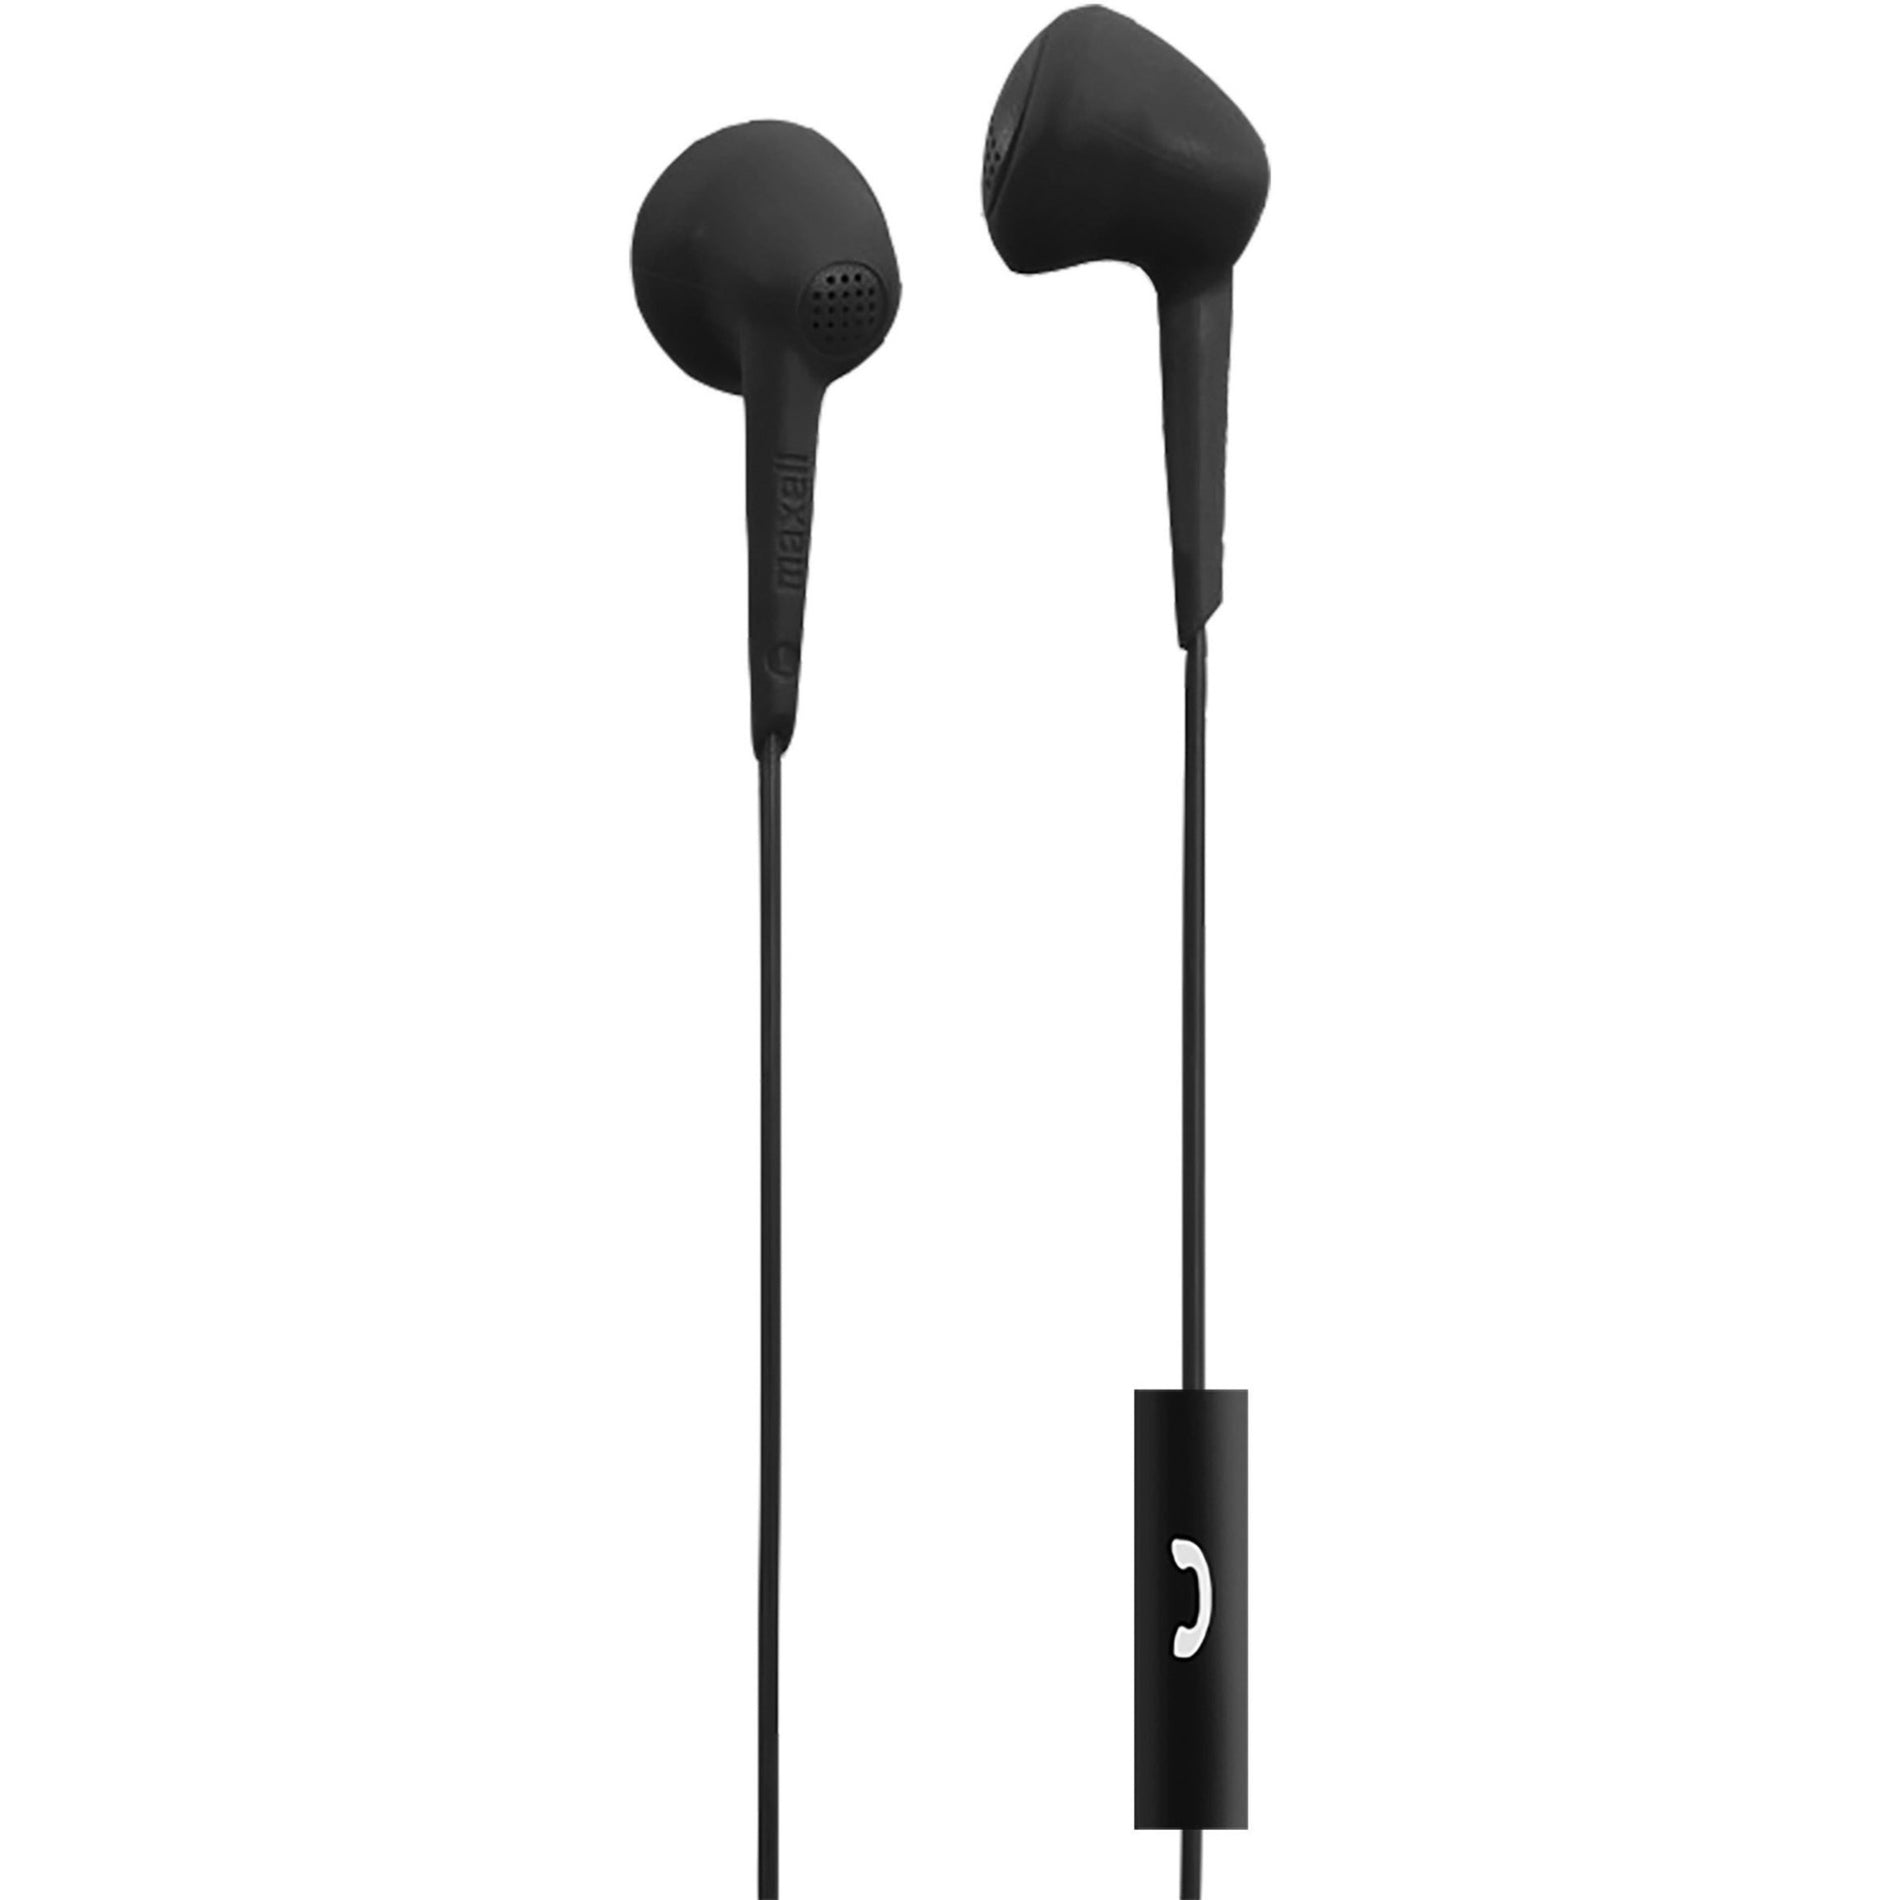 Maxell 191569 Jelleez Earset, Lightweight Comfortable Stereo Earbuds with Mic, Soft Comfort Fit, Black